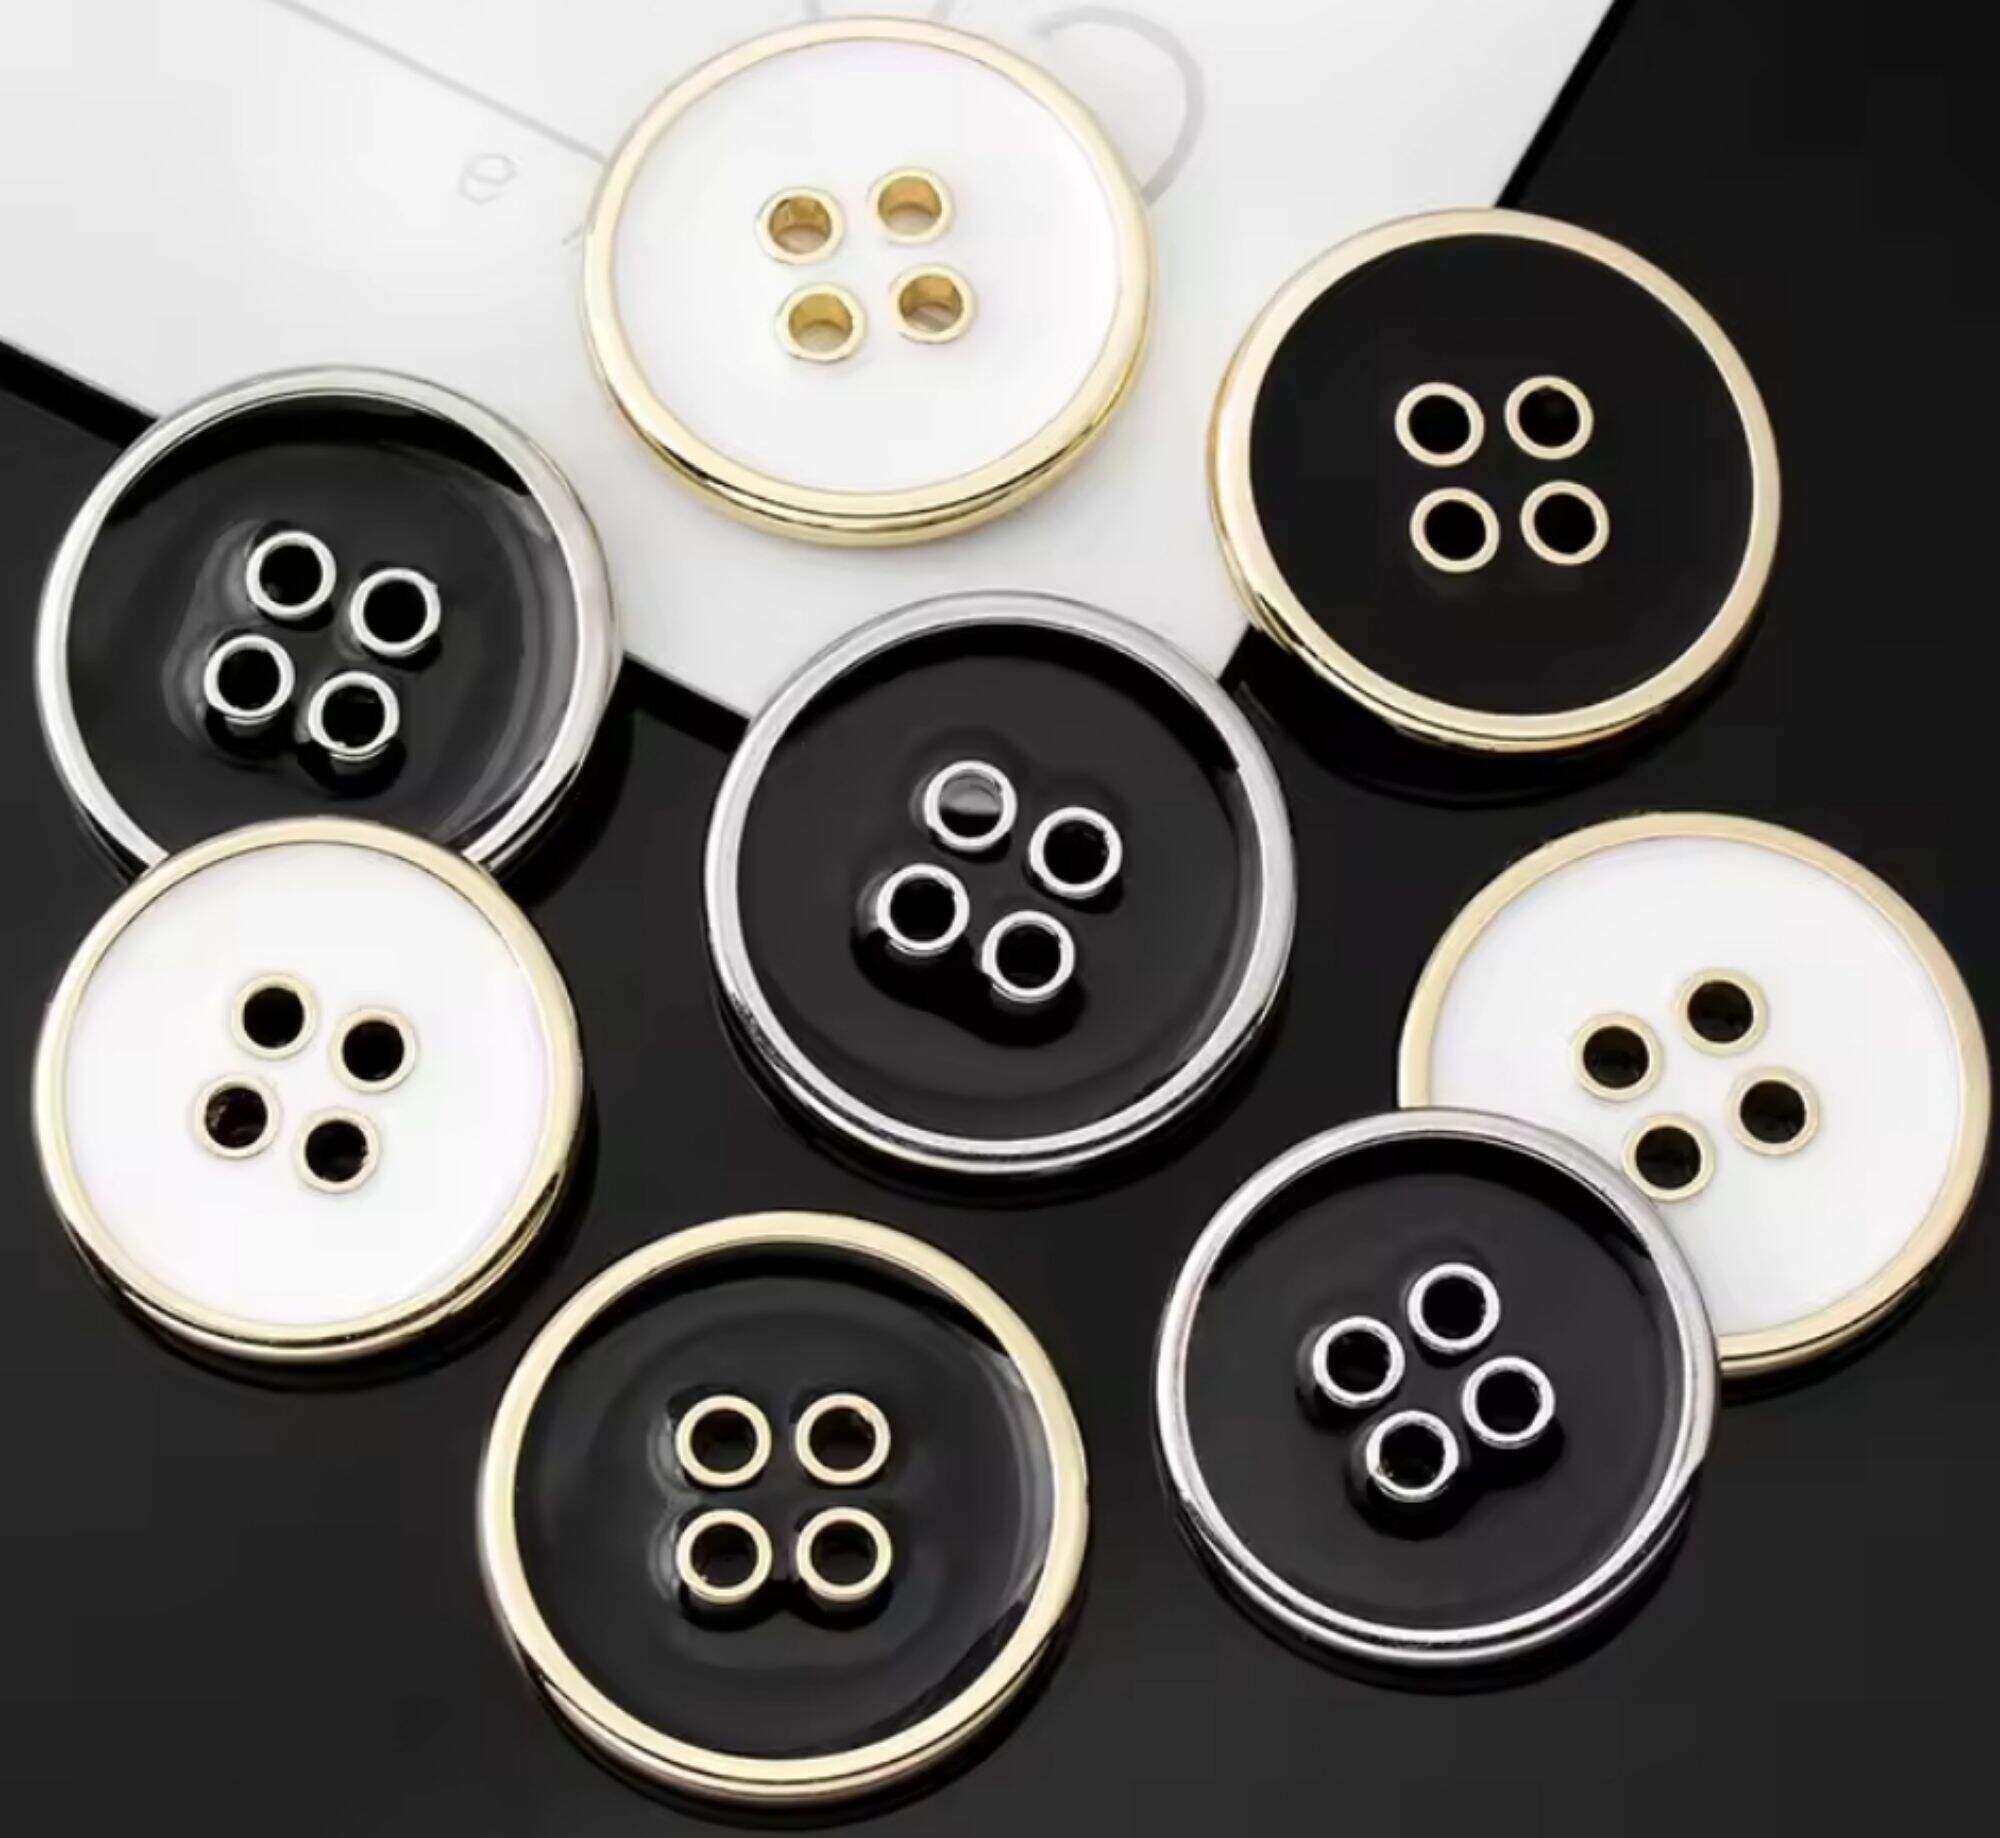 Types and characteristics of metal buttons